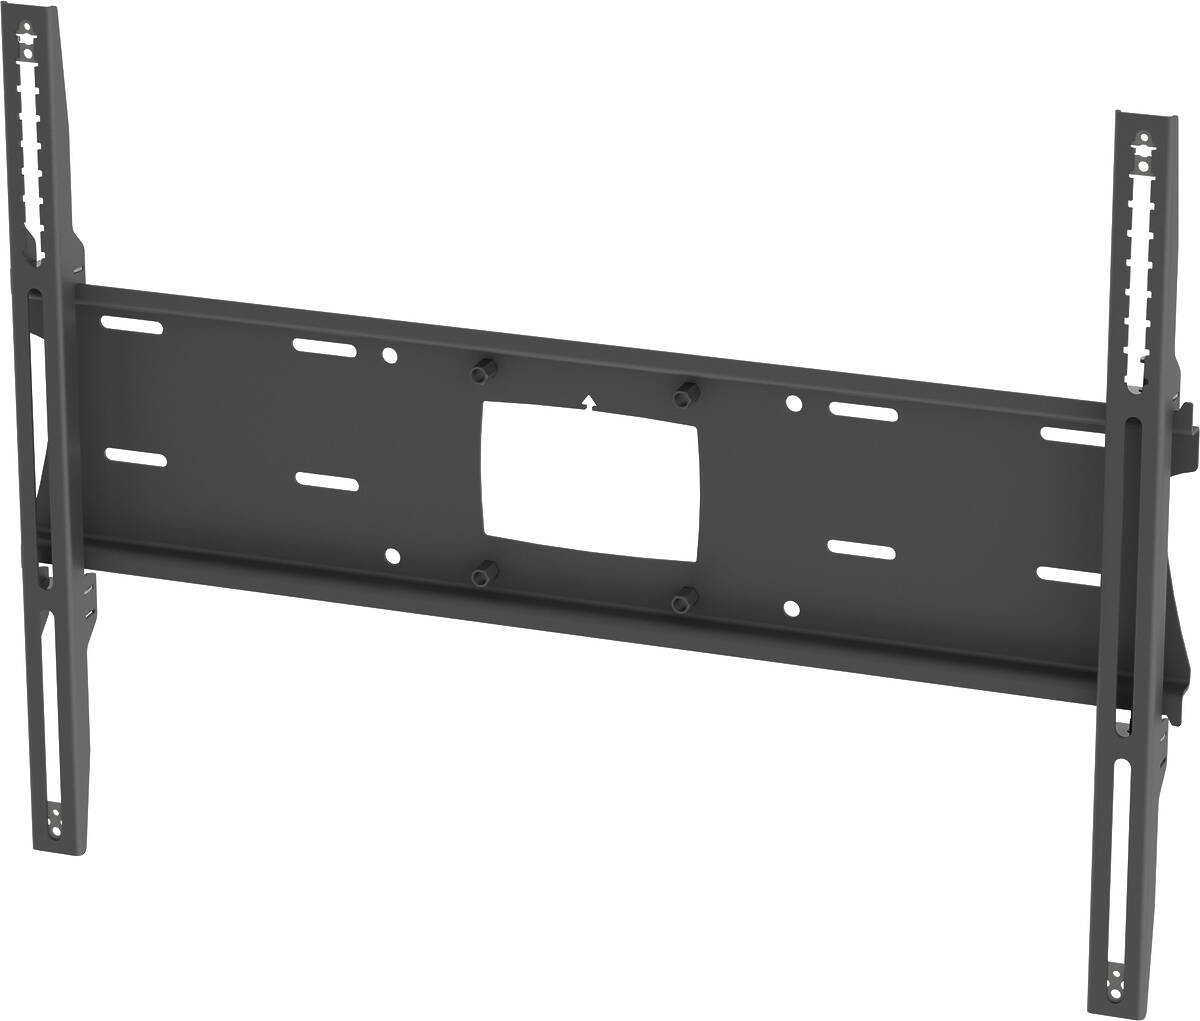 Unicol PZX5 Pozimount flat wall mount for monitors and TVs from 33 to 70 inches product image. Click to enlarge.